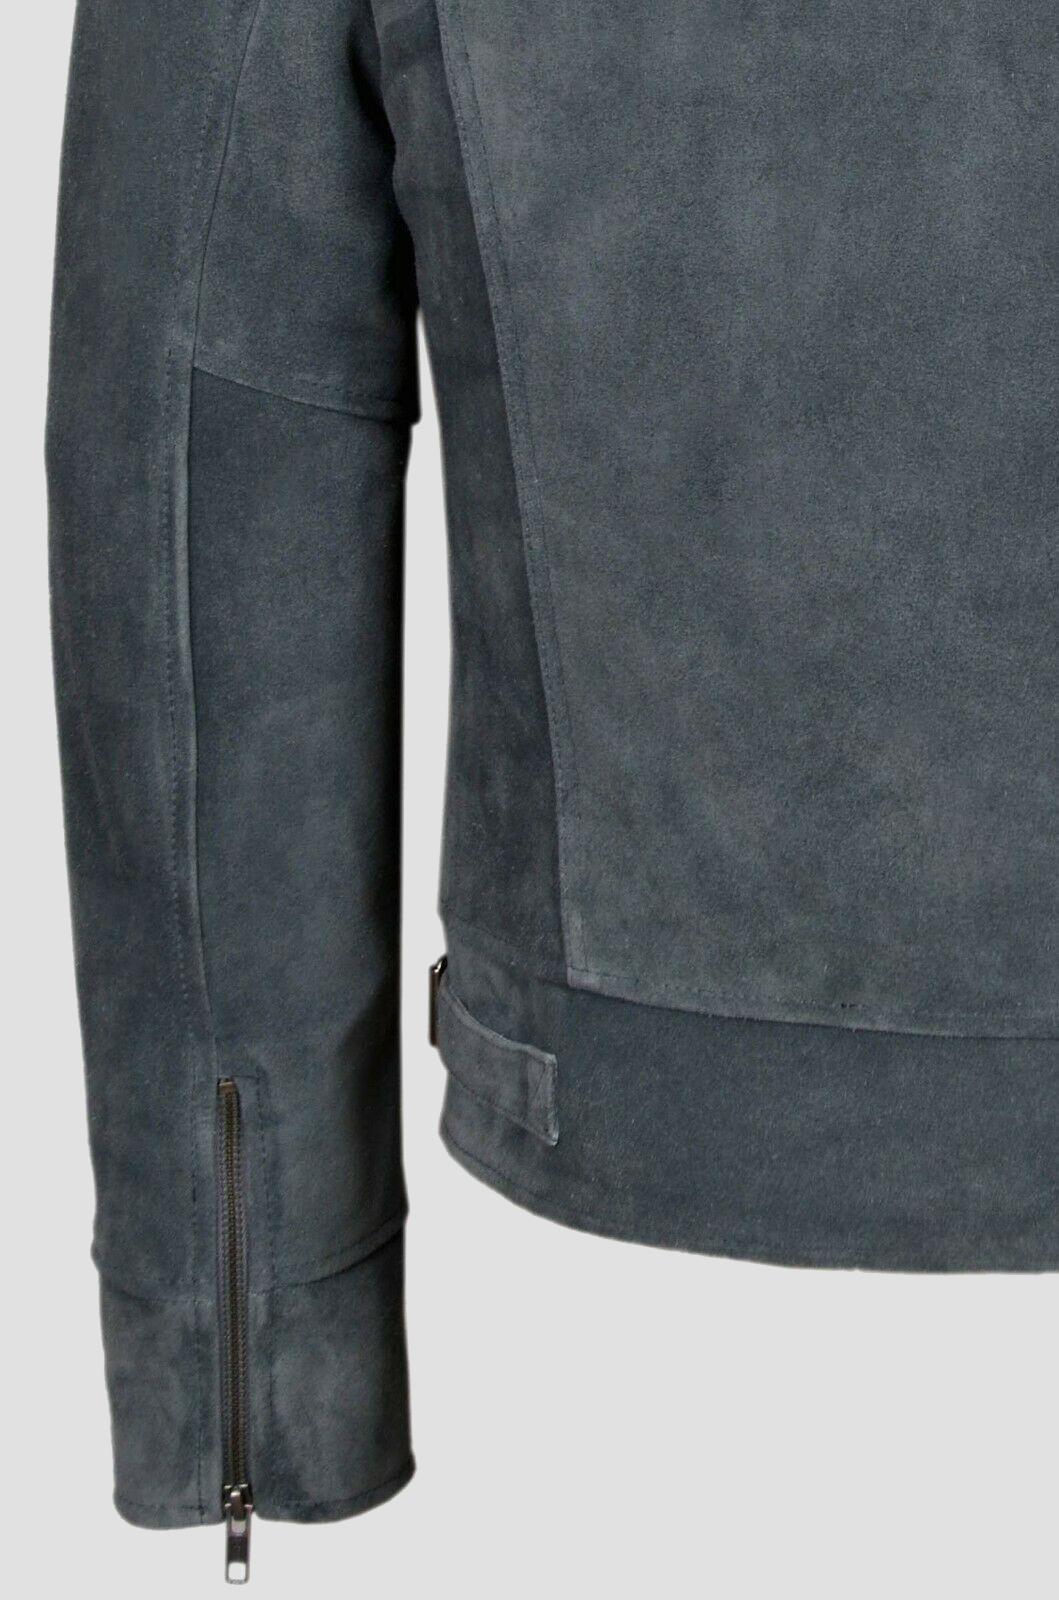 Stallon Grey Suede Jacket - The Vintage Leather